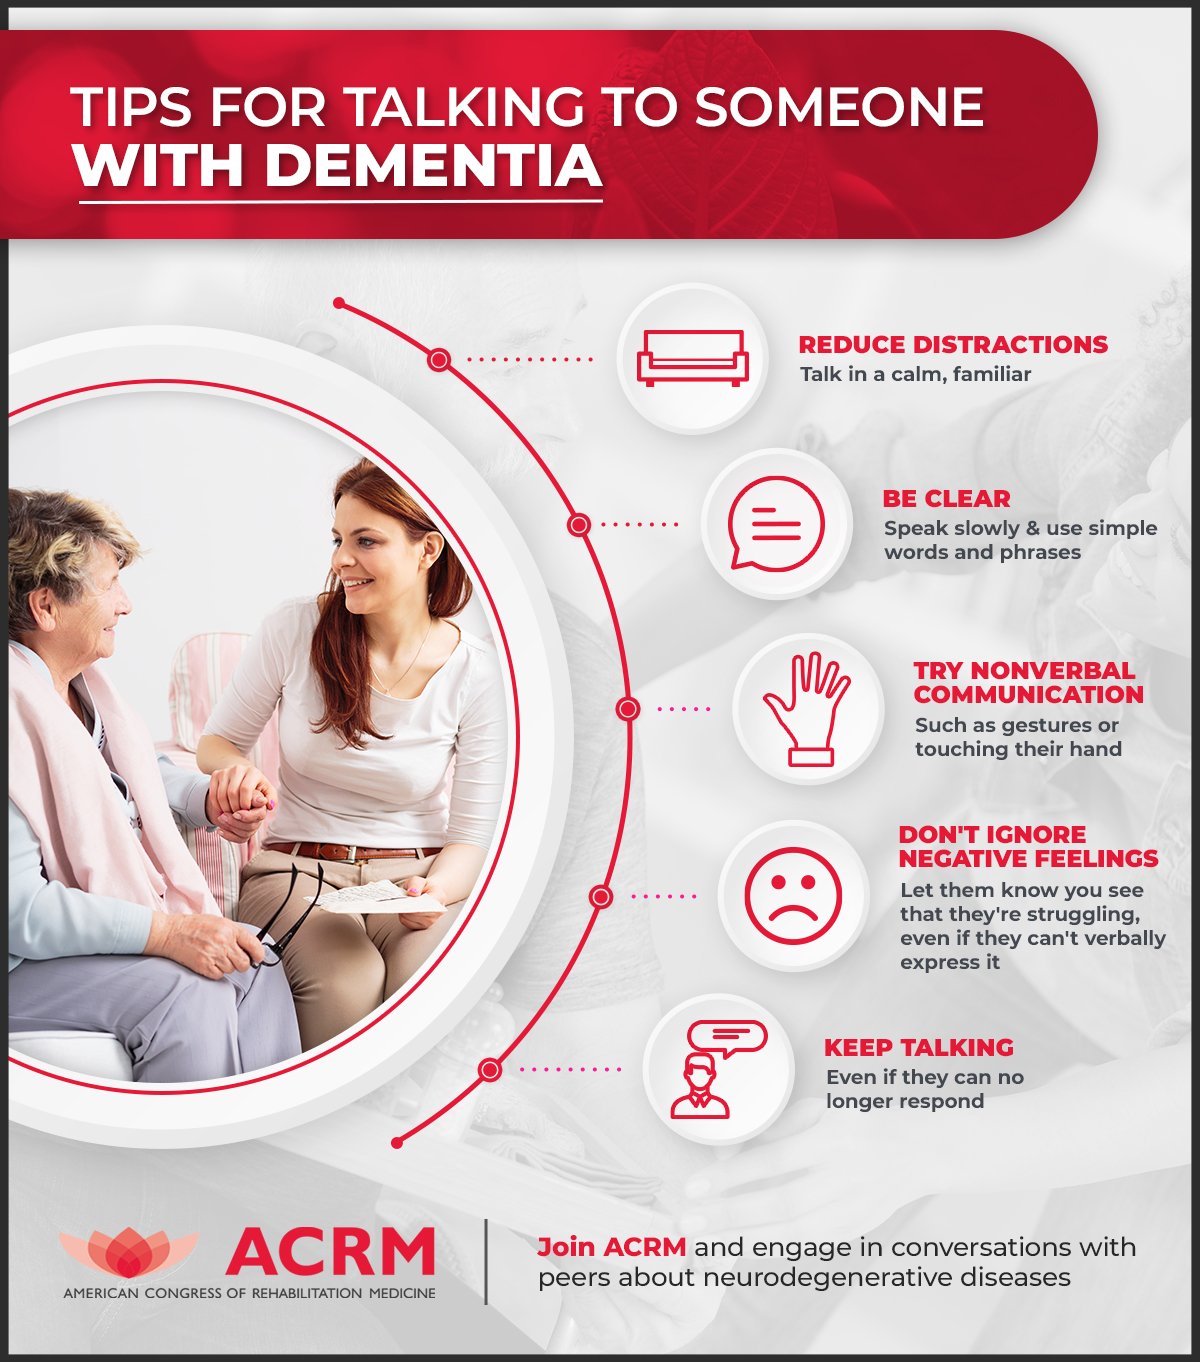 Tips For Talking To Someone With Dementia infographic